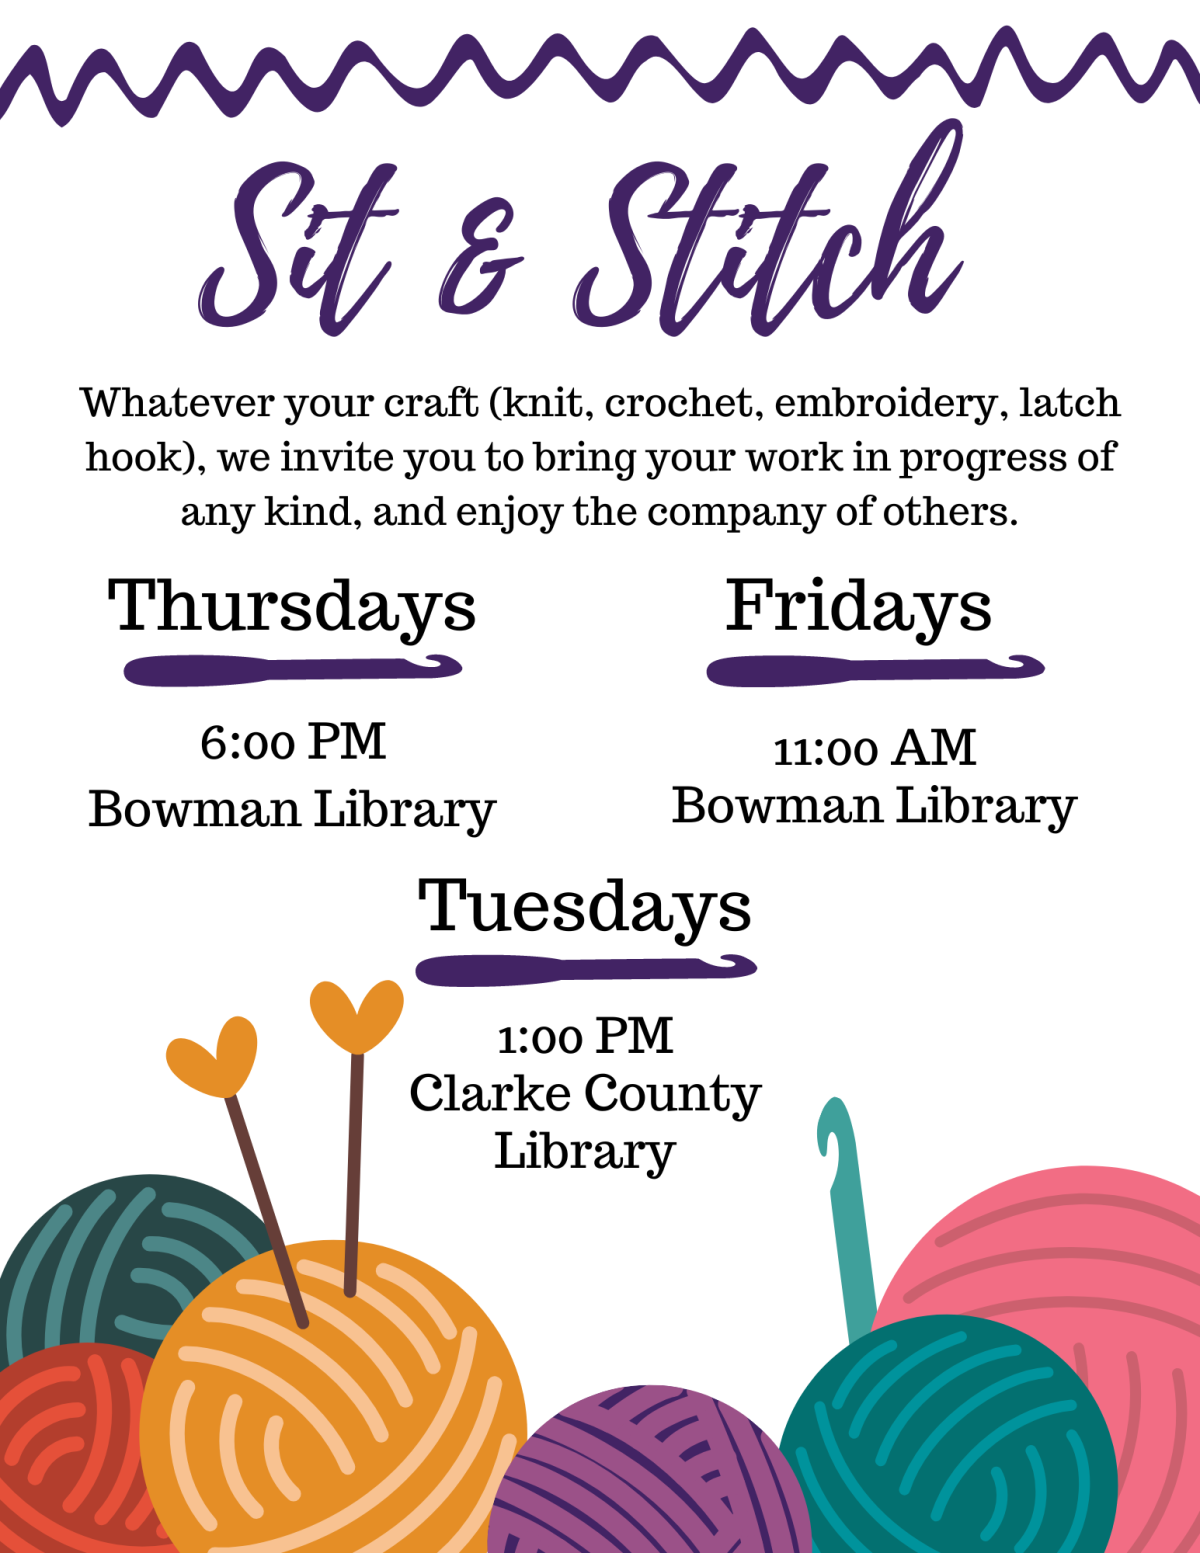 Sit and Stitch on Tuesdays at 1pm at Clarke County Library and Thursdays at 6pm and Fridays at 11am at Bowman Library